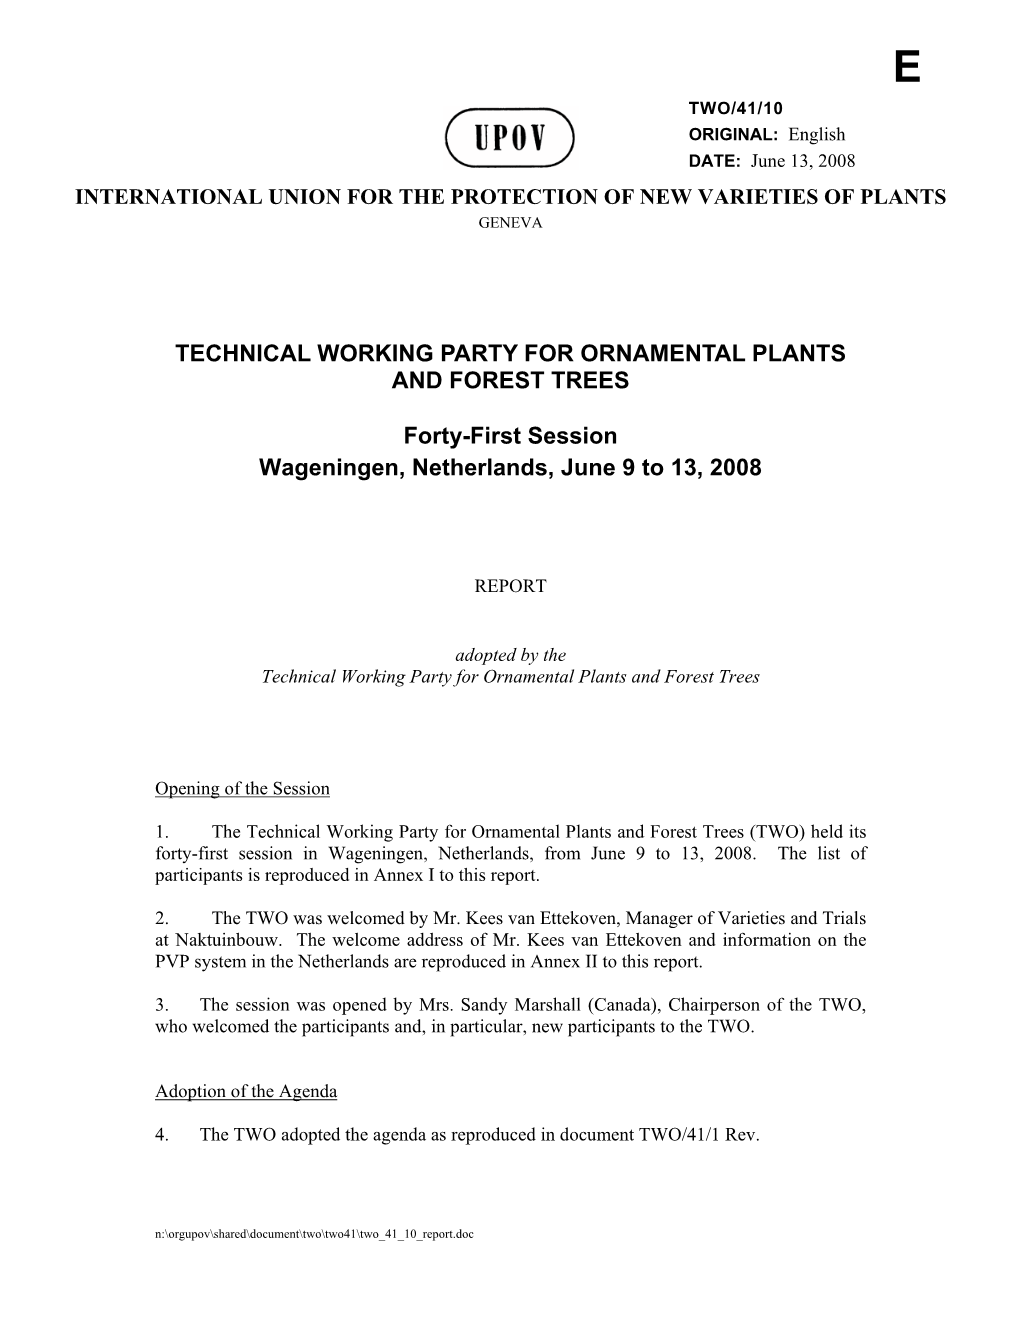 Technical Working Party for Ornamental Plants and Forest Trees